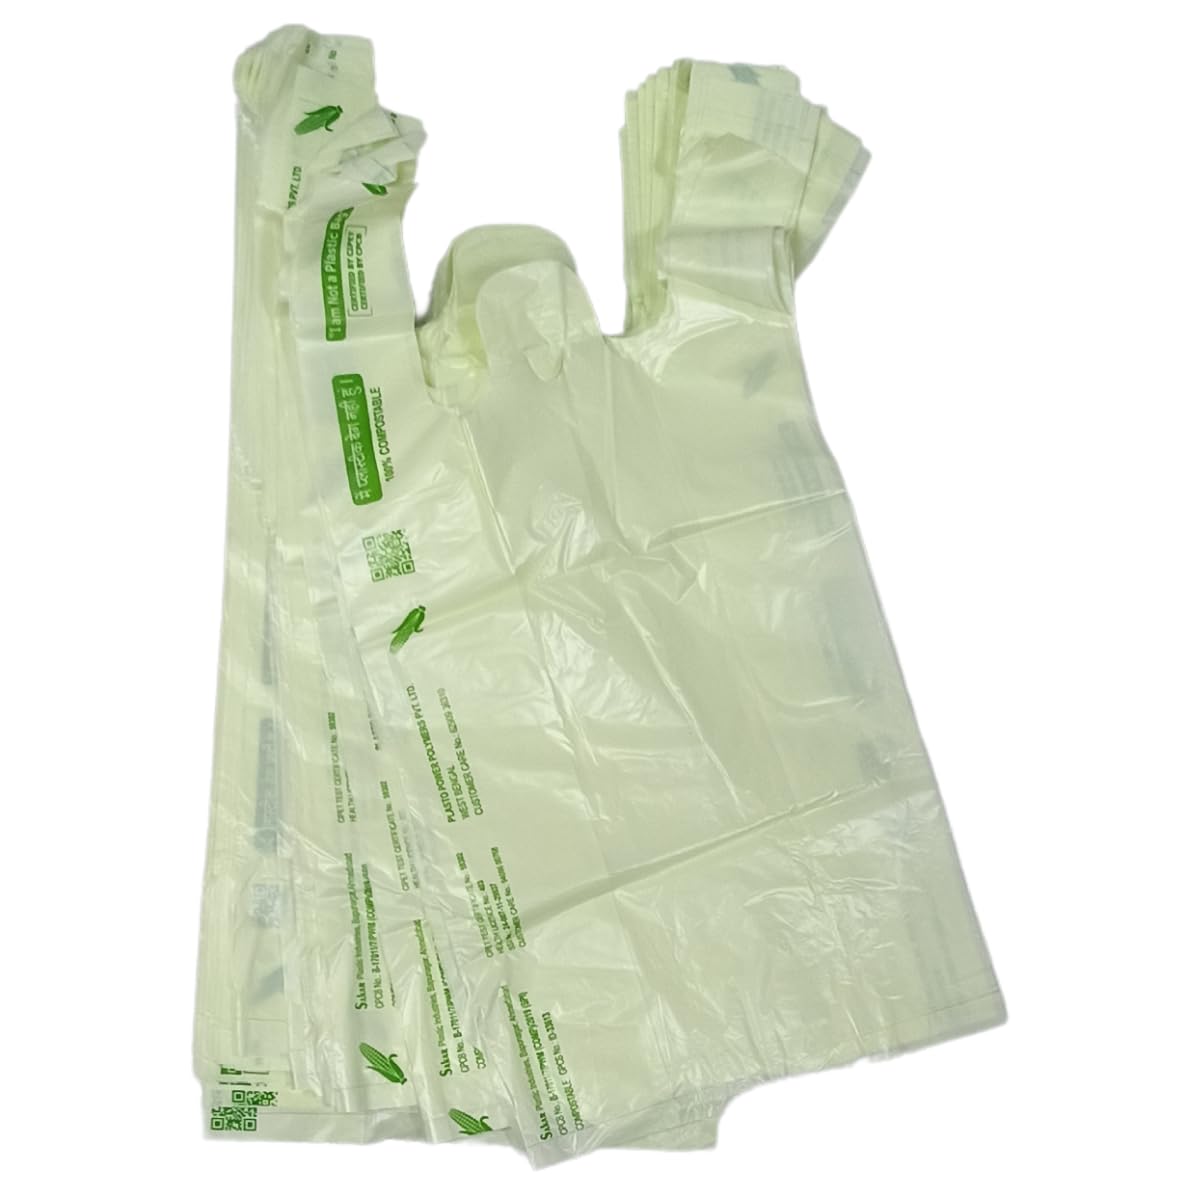 SINGHAL 100% Compostable/Biodegradable Shopping Bag Carry Bags holding weight upto 3 kg PACK OF 100 Bags 10x12 Inch